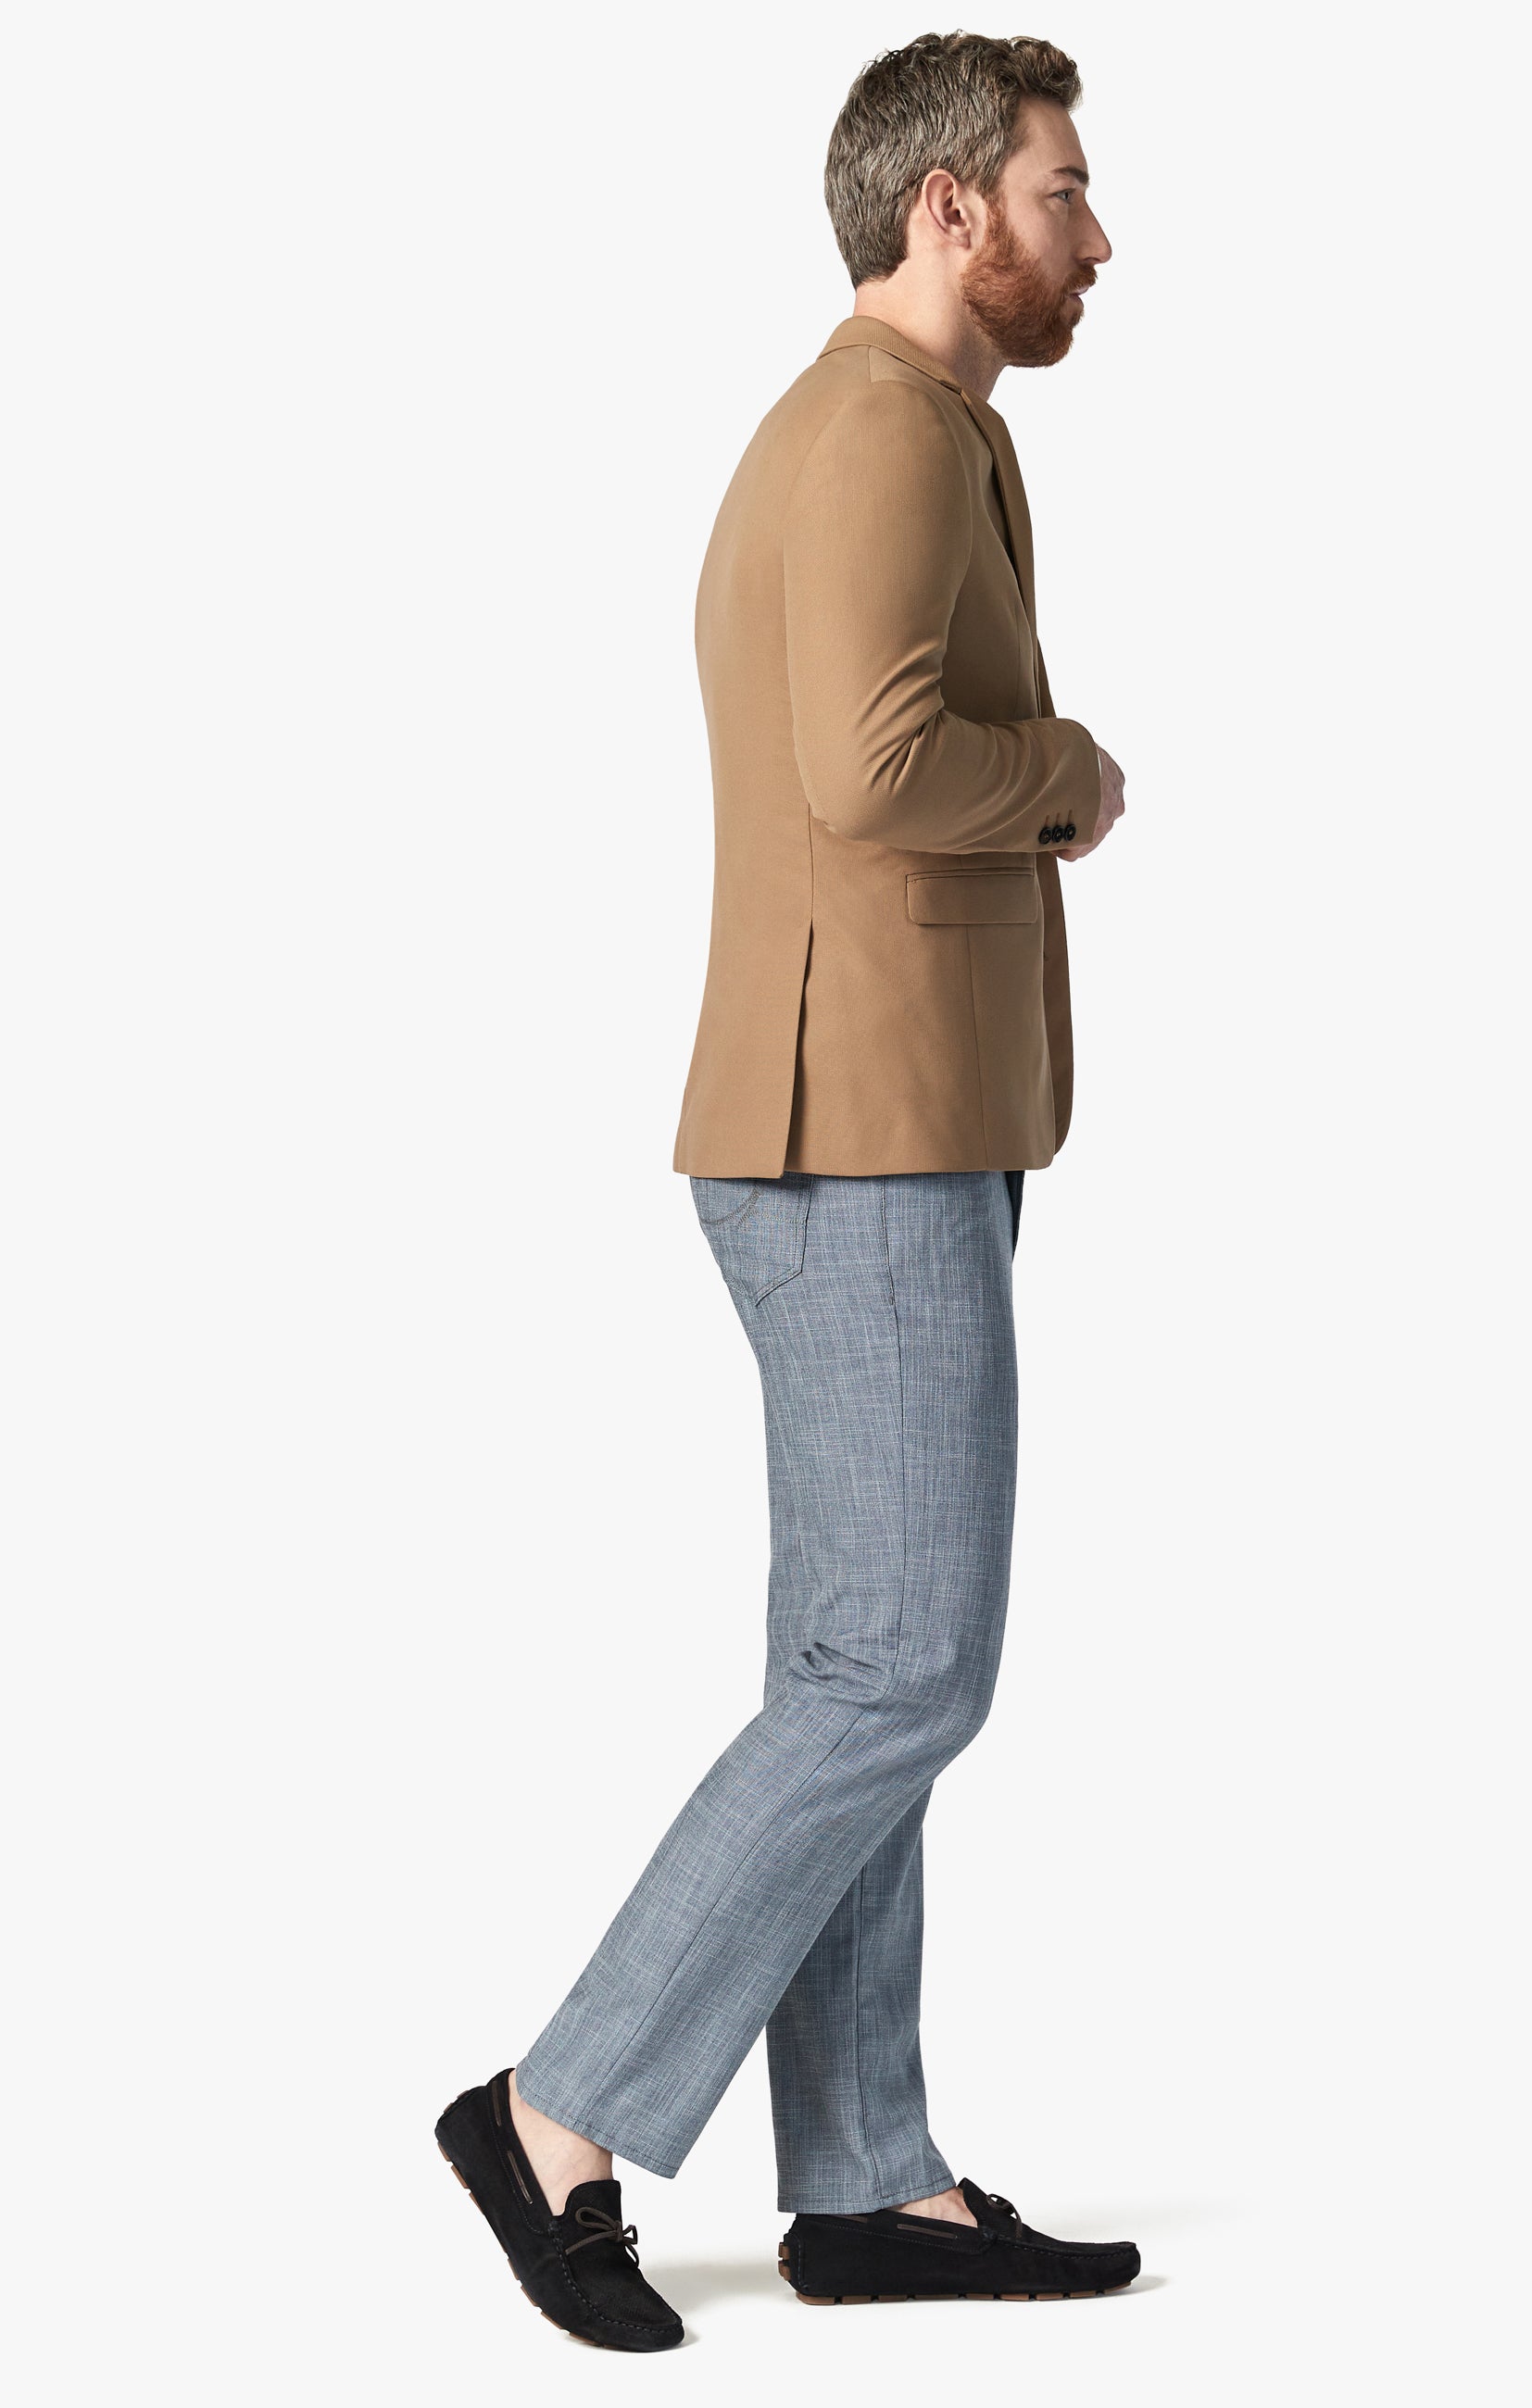 Charisma Relaxed Straight Pants in Grey Cross Twill Image 2